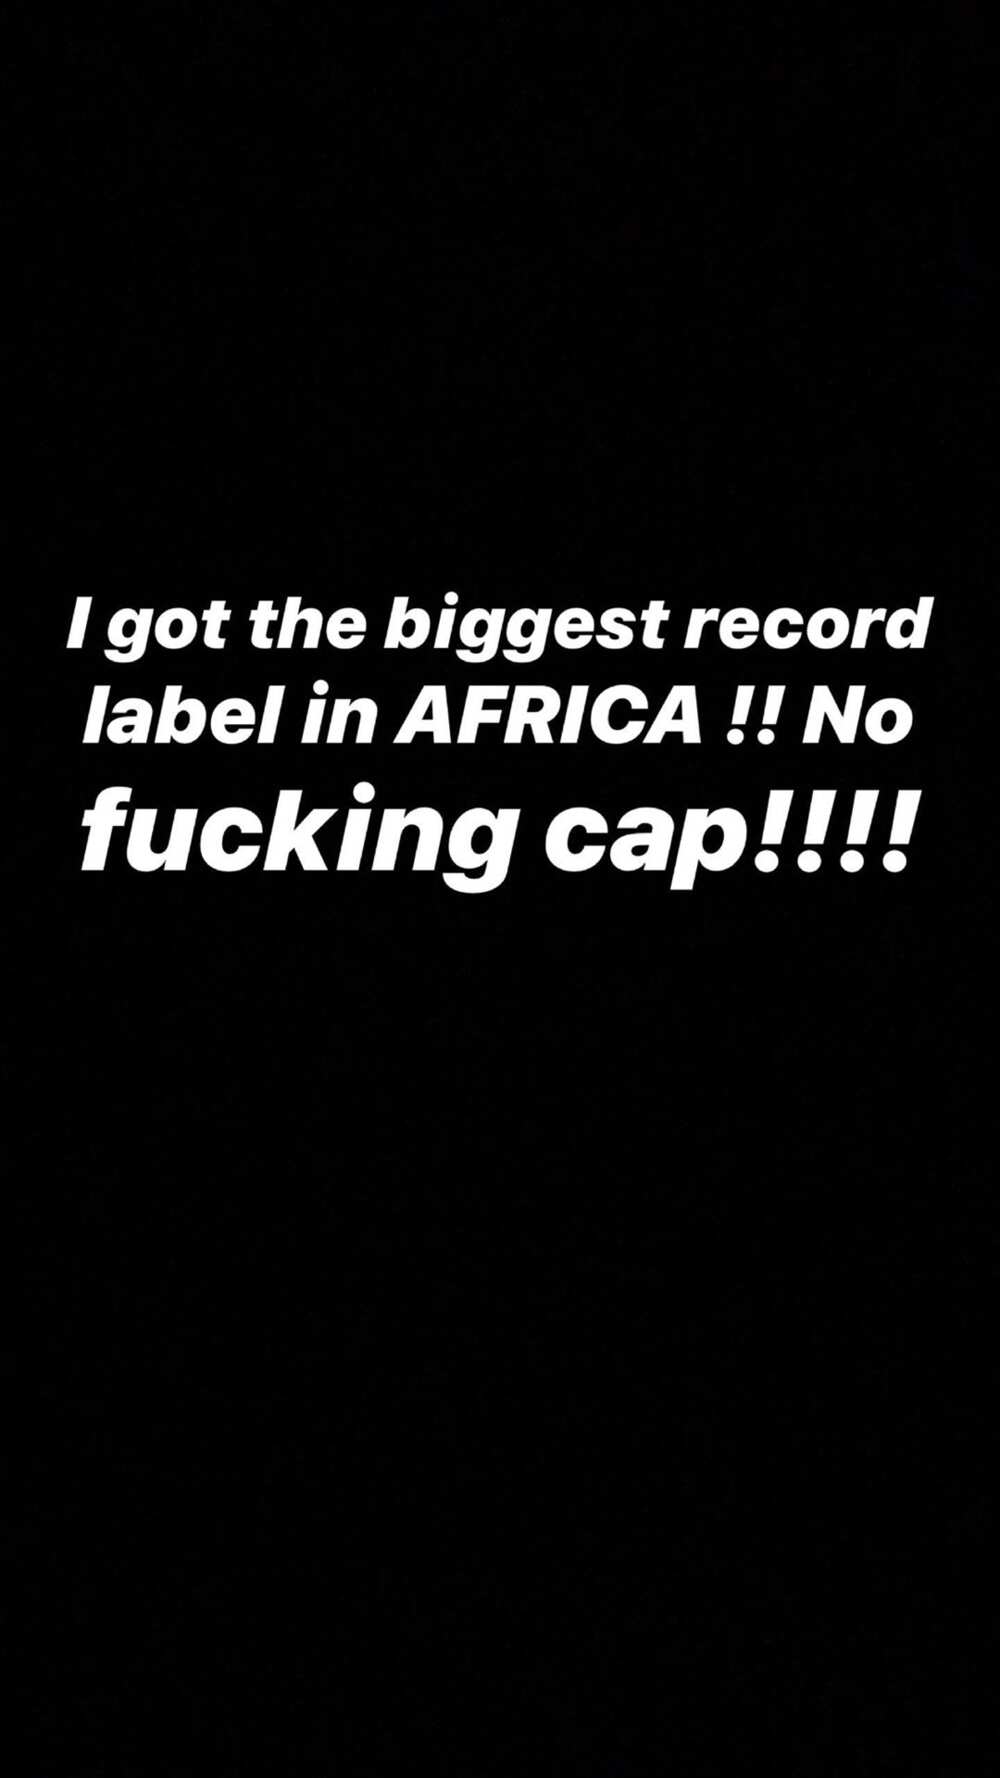 Davido declares his record label the best in Africa